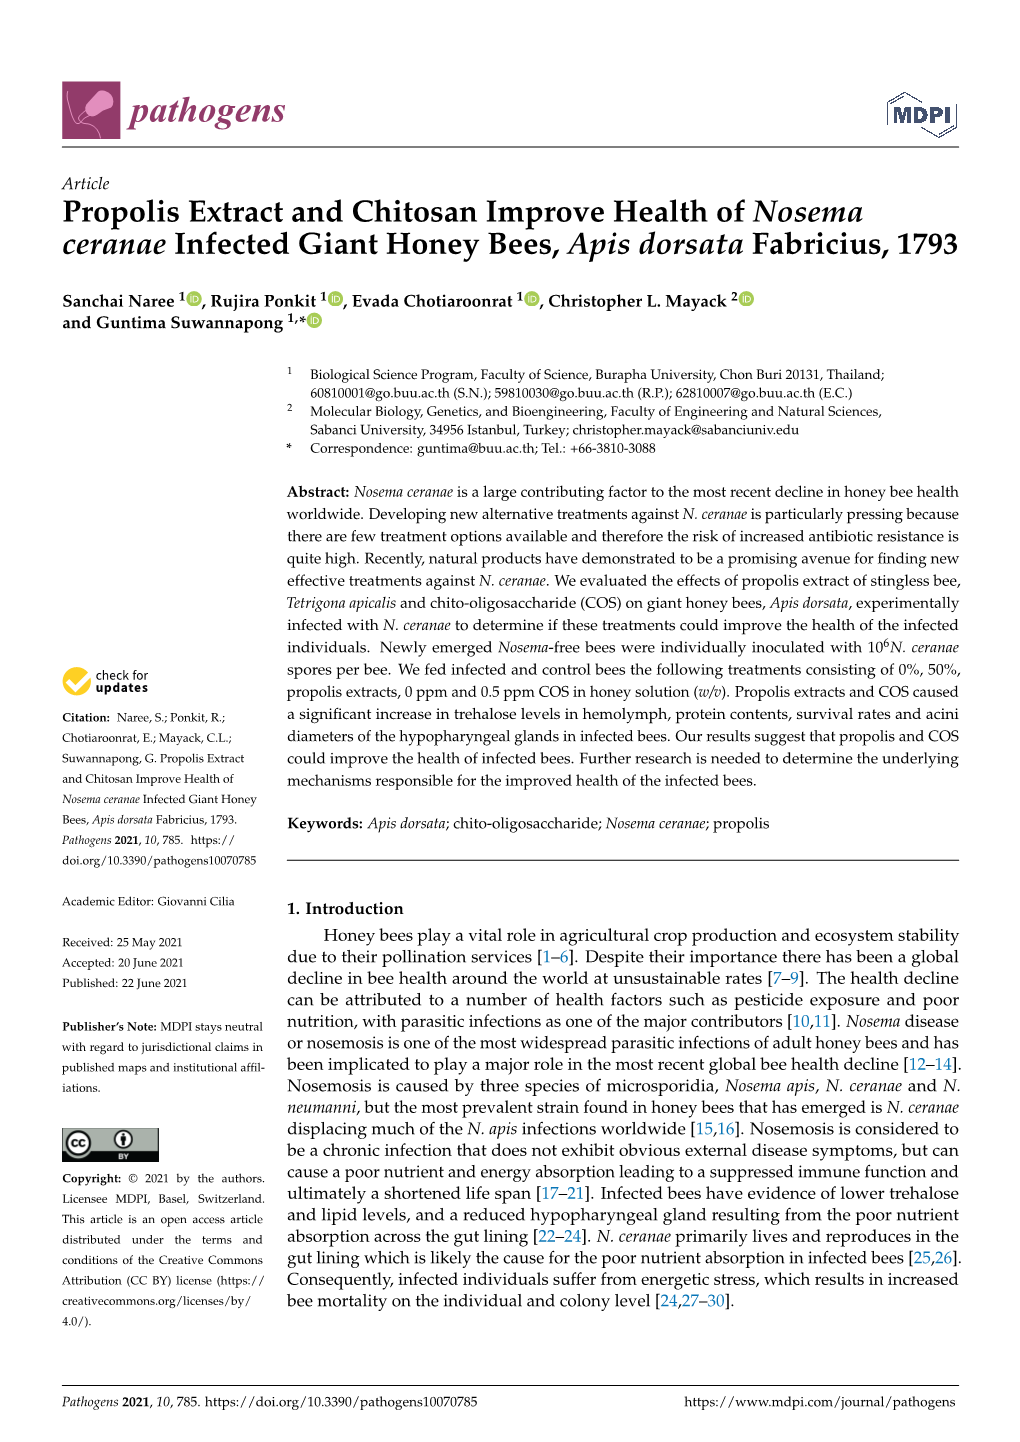 Propolis Extract and Chitosan Improve Health of Nosema Ceranae Infected Giant Honey Bees, Apis Dorsata Fabricius, 1793